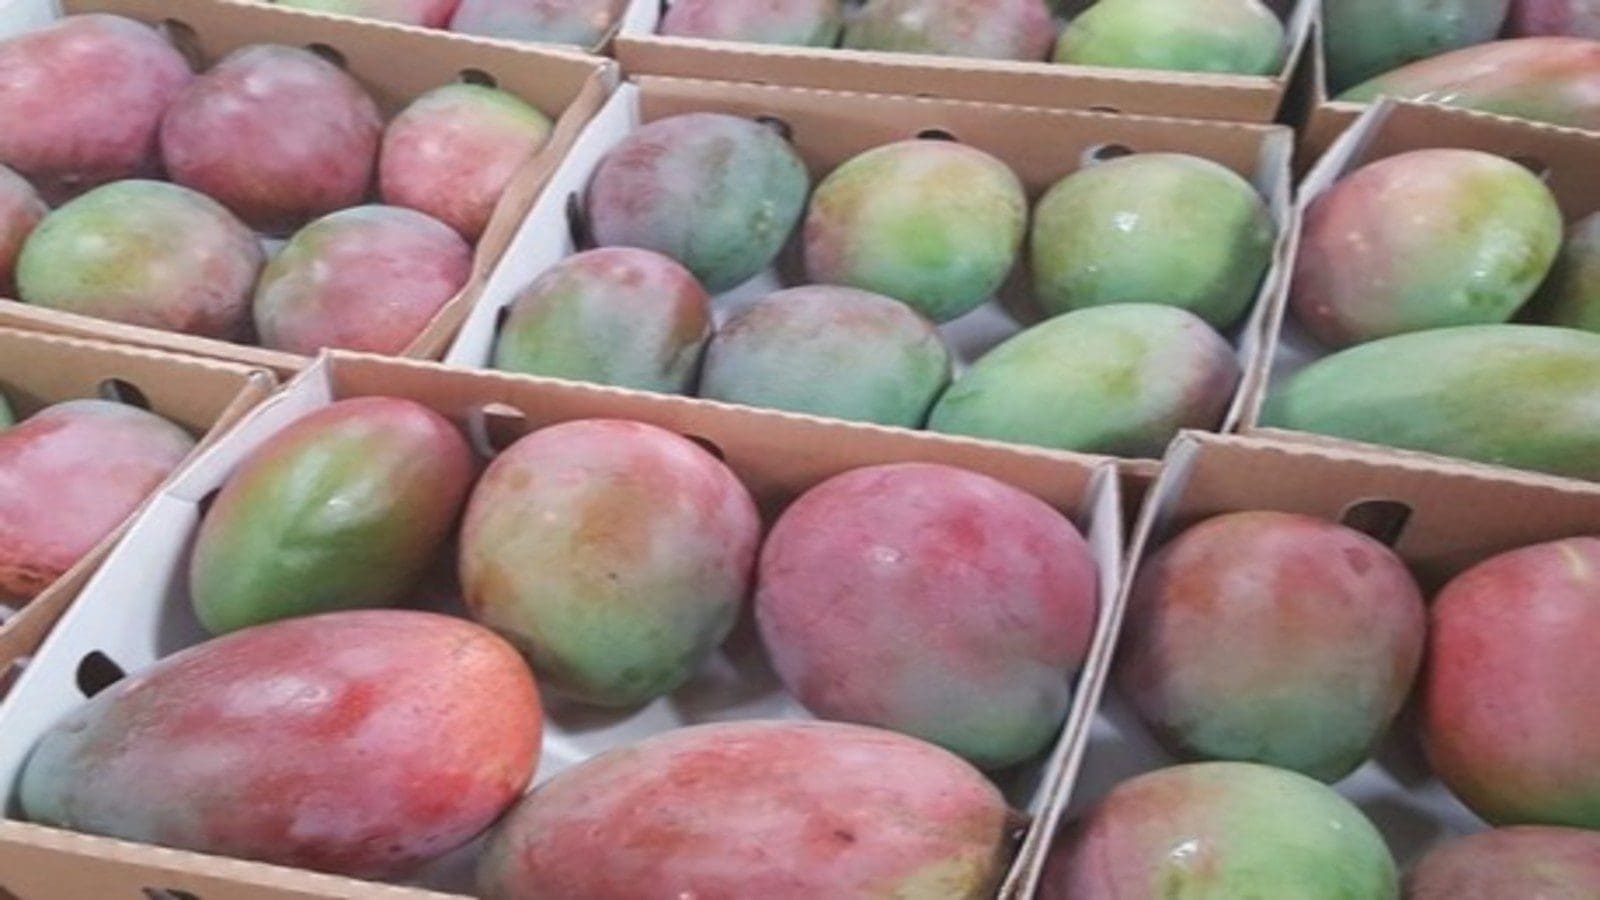 Kenya to resume mango export to Italy after passing safety tests